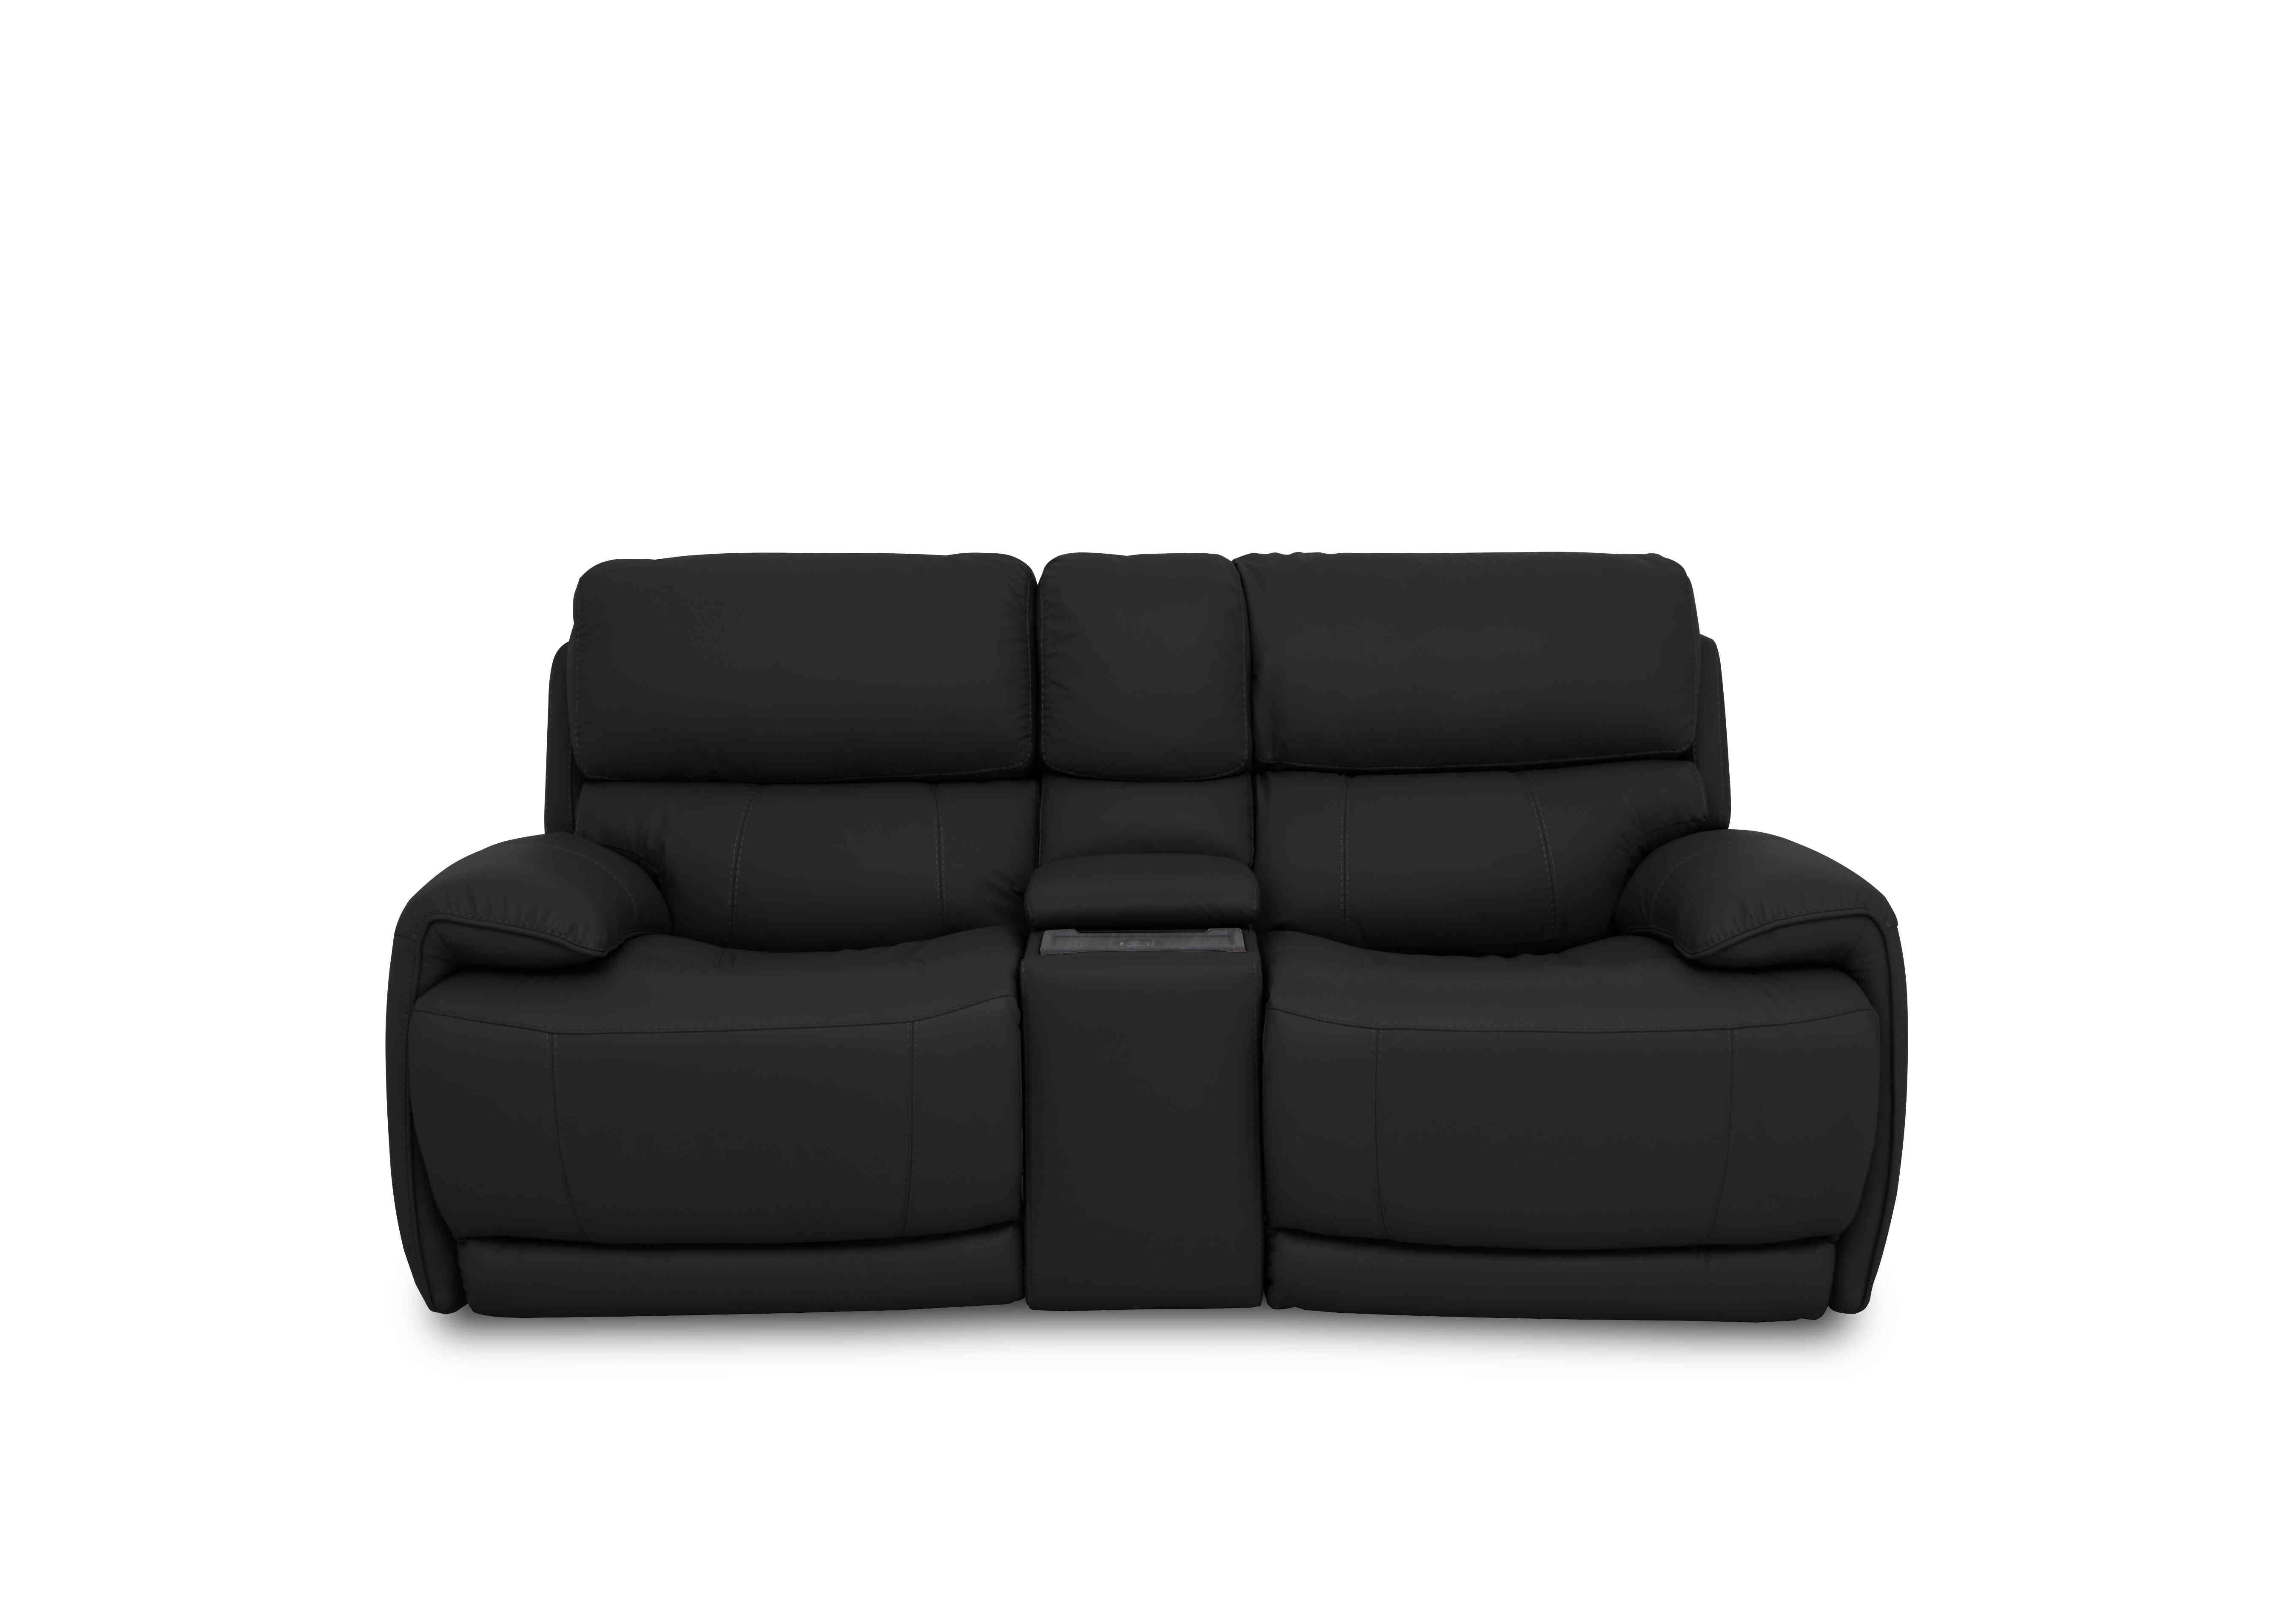 Rocco 2 Seater Leather Power Rocker Sofa with Cup Holders and Power Headrests in Bv-3500 Classic Black on Furniture Village